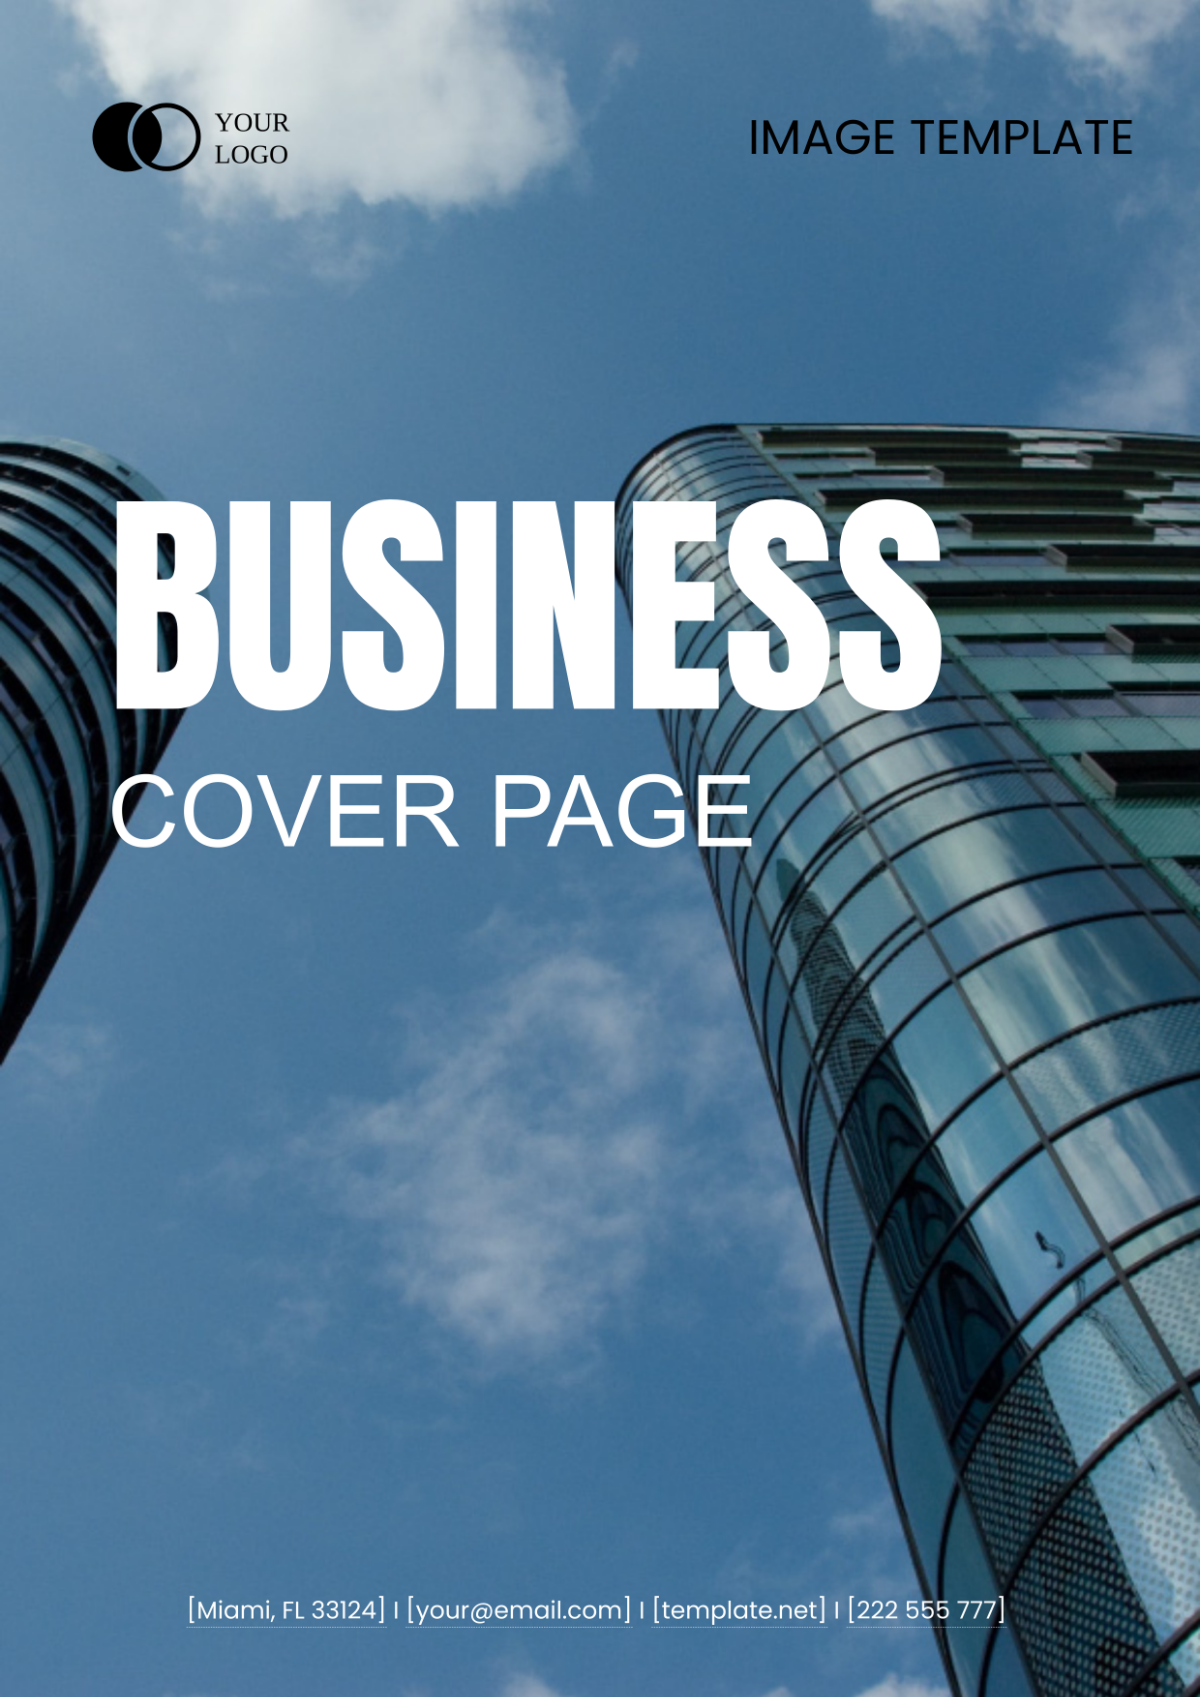 Business Cover Page Image